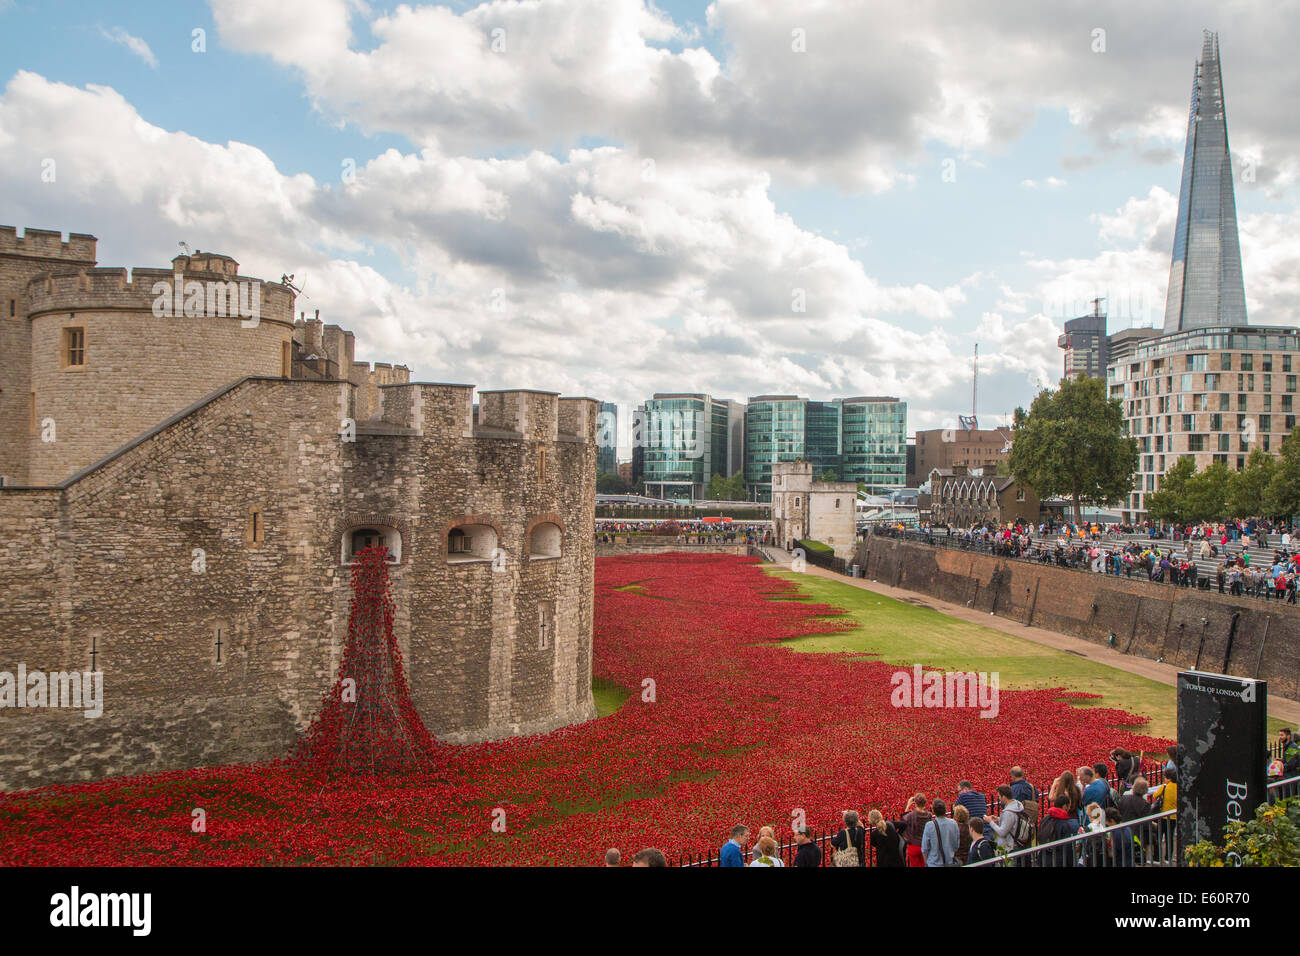 General view of the moat of the Tower of London with the poppies, the 'weeping window', the Shard and visitors Stock Photo